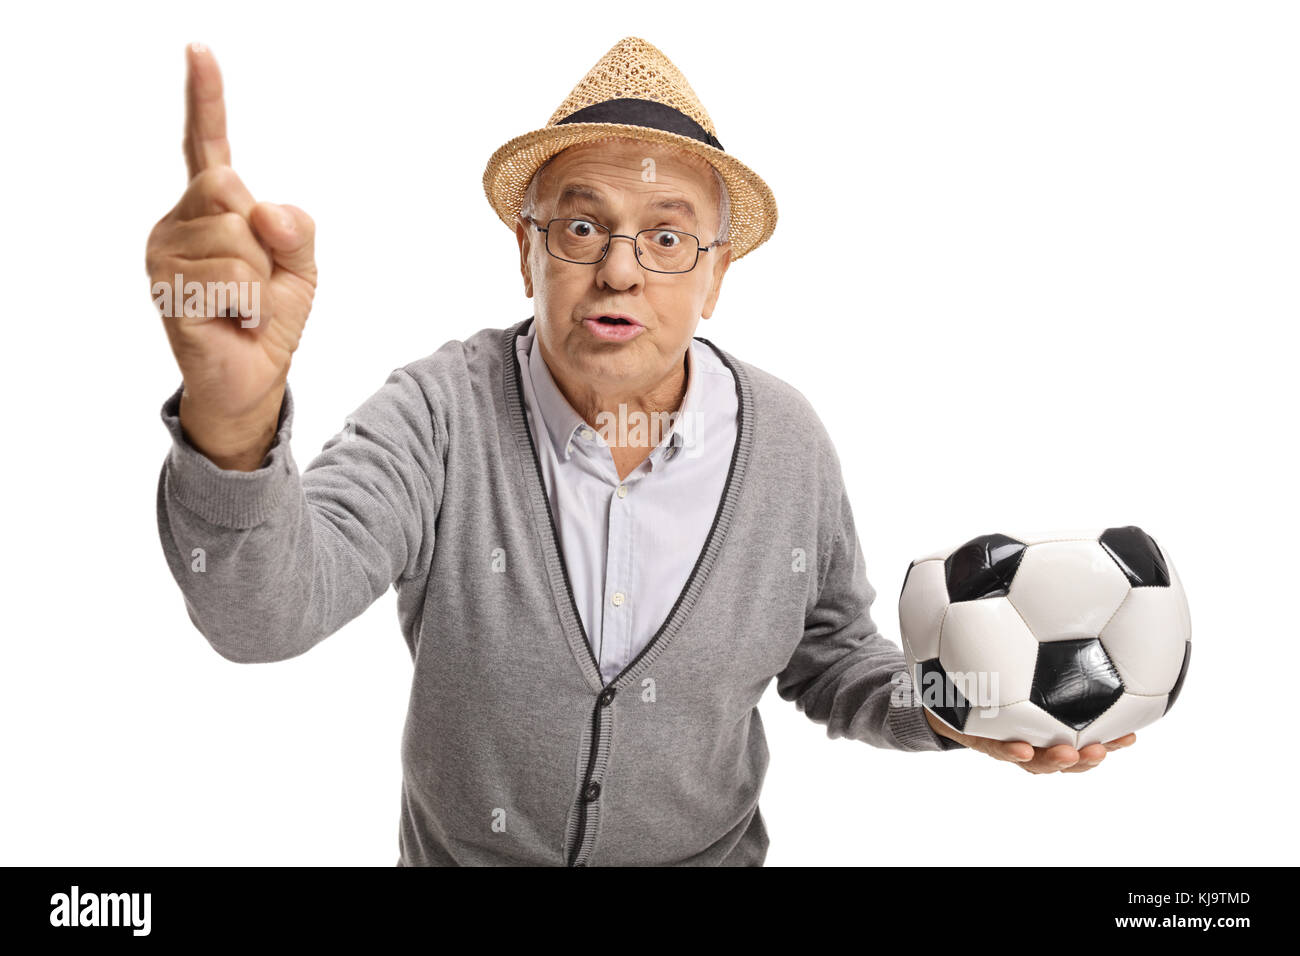 Angry senior with a deflated football arguing and gesturing with his finger isolated on white background Stock Photo